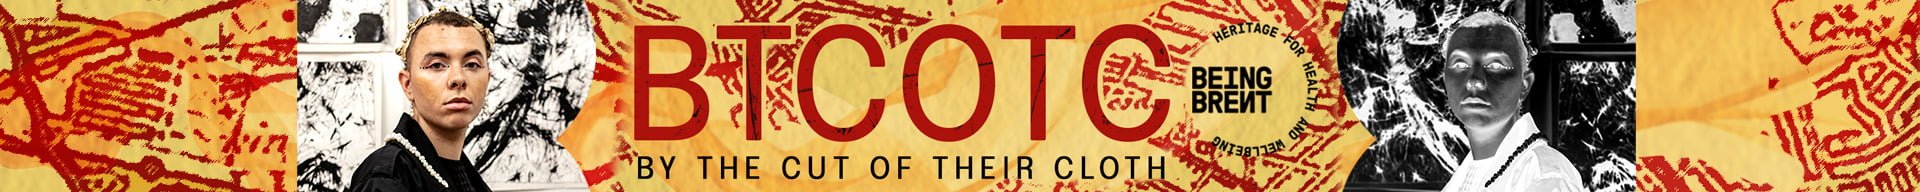 By The Cut of Their Cloth BTCOTC web banner